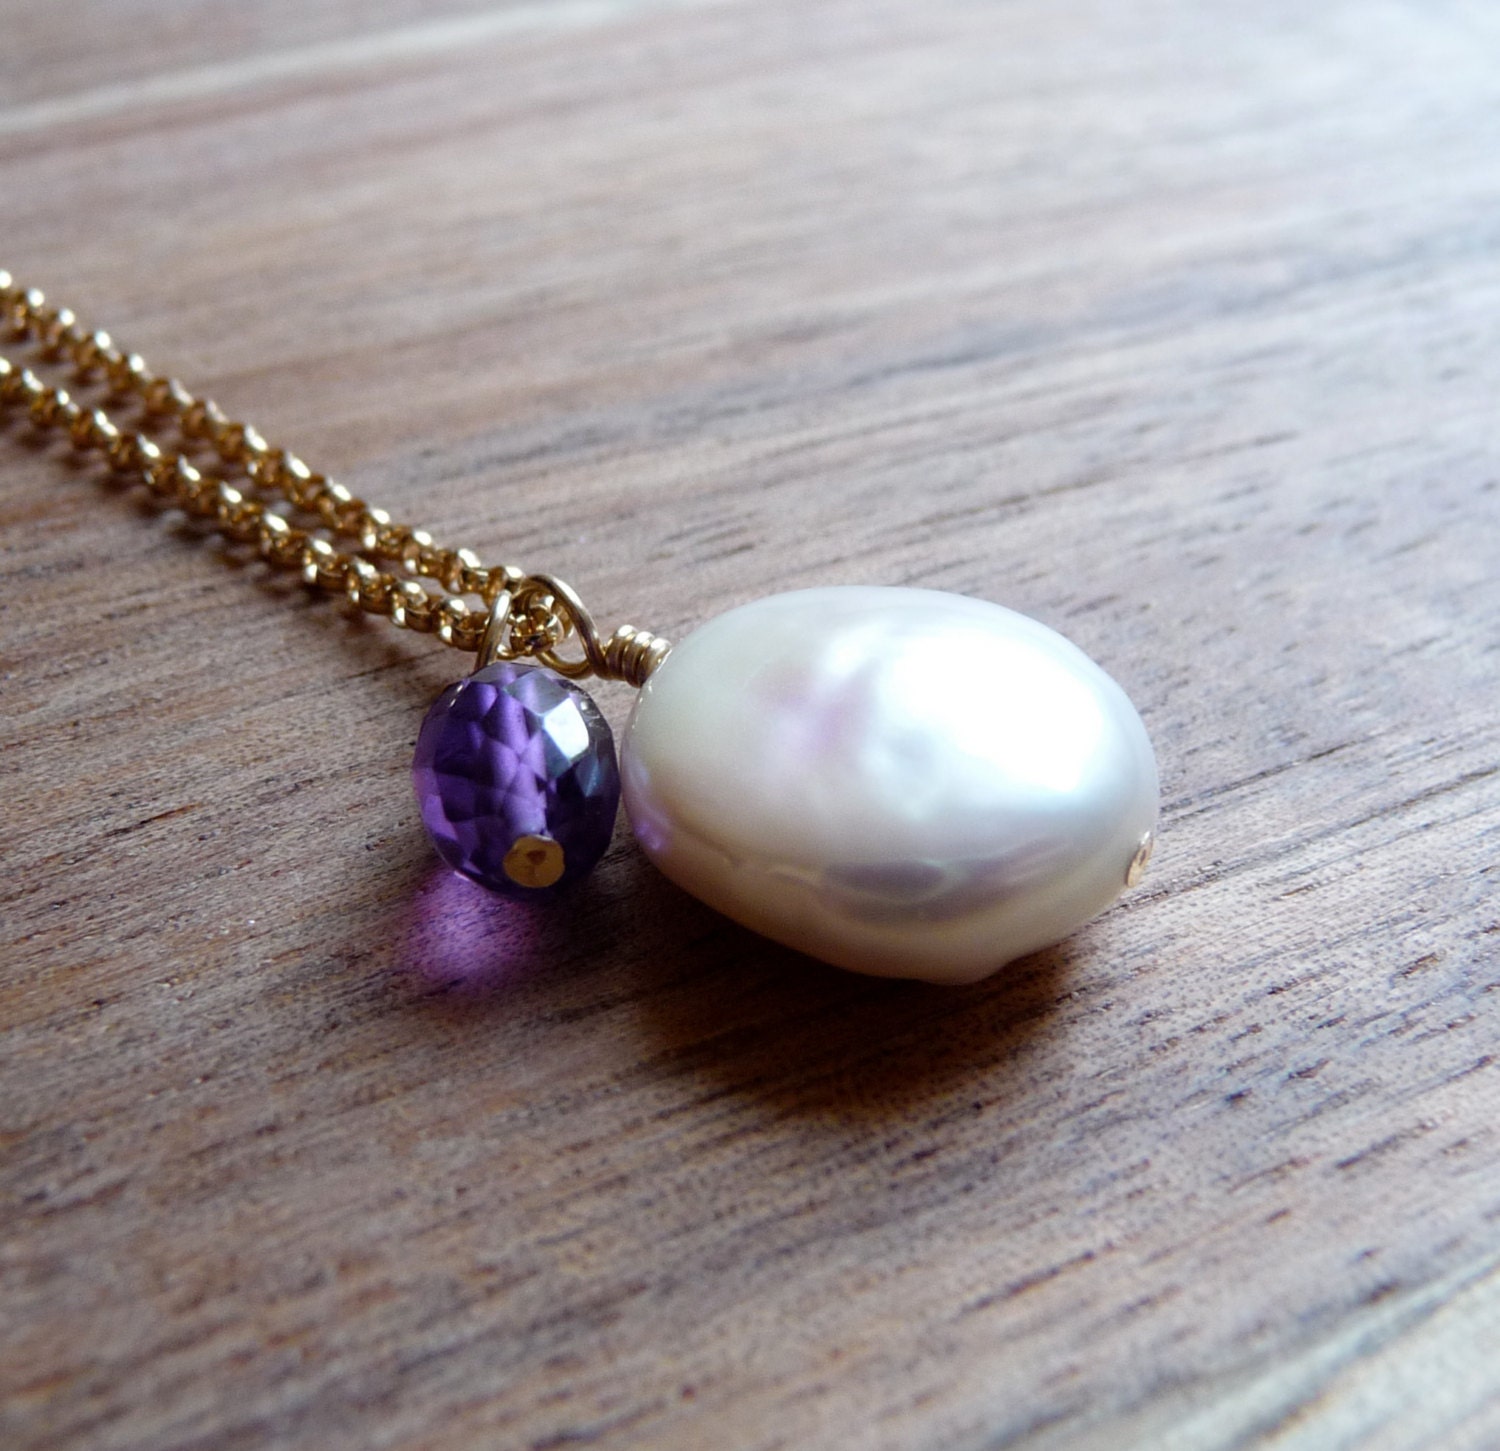 Pearl Necklace, Amethyst Necklace, Purple Amethyst Gemstone, Coin Pearl, February Birthstone, Minimal Jewelry, Gold Filled Chain Necklace - karinagracejewelry